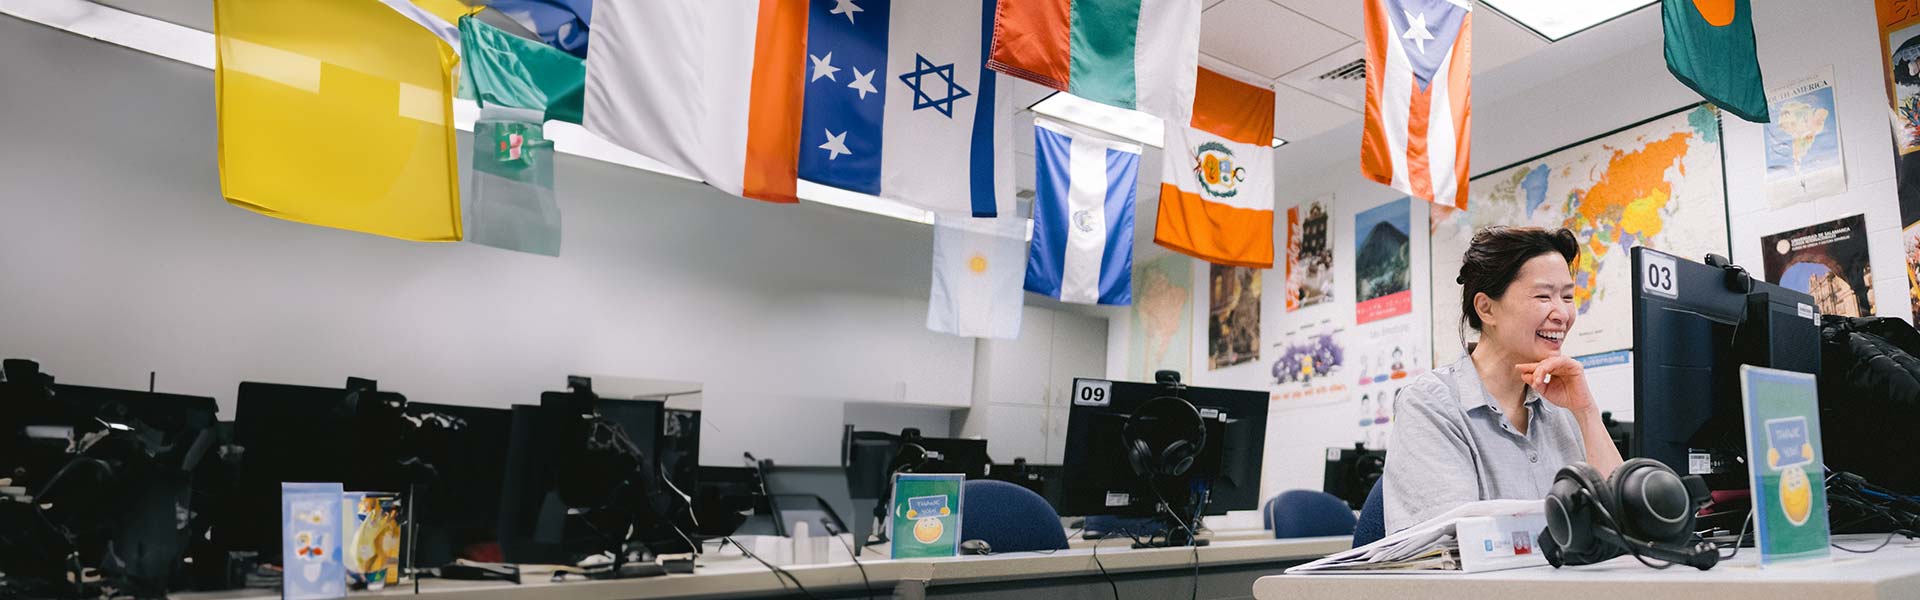 student in room with international flags hanging from the ceiling